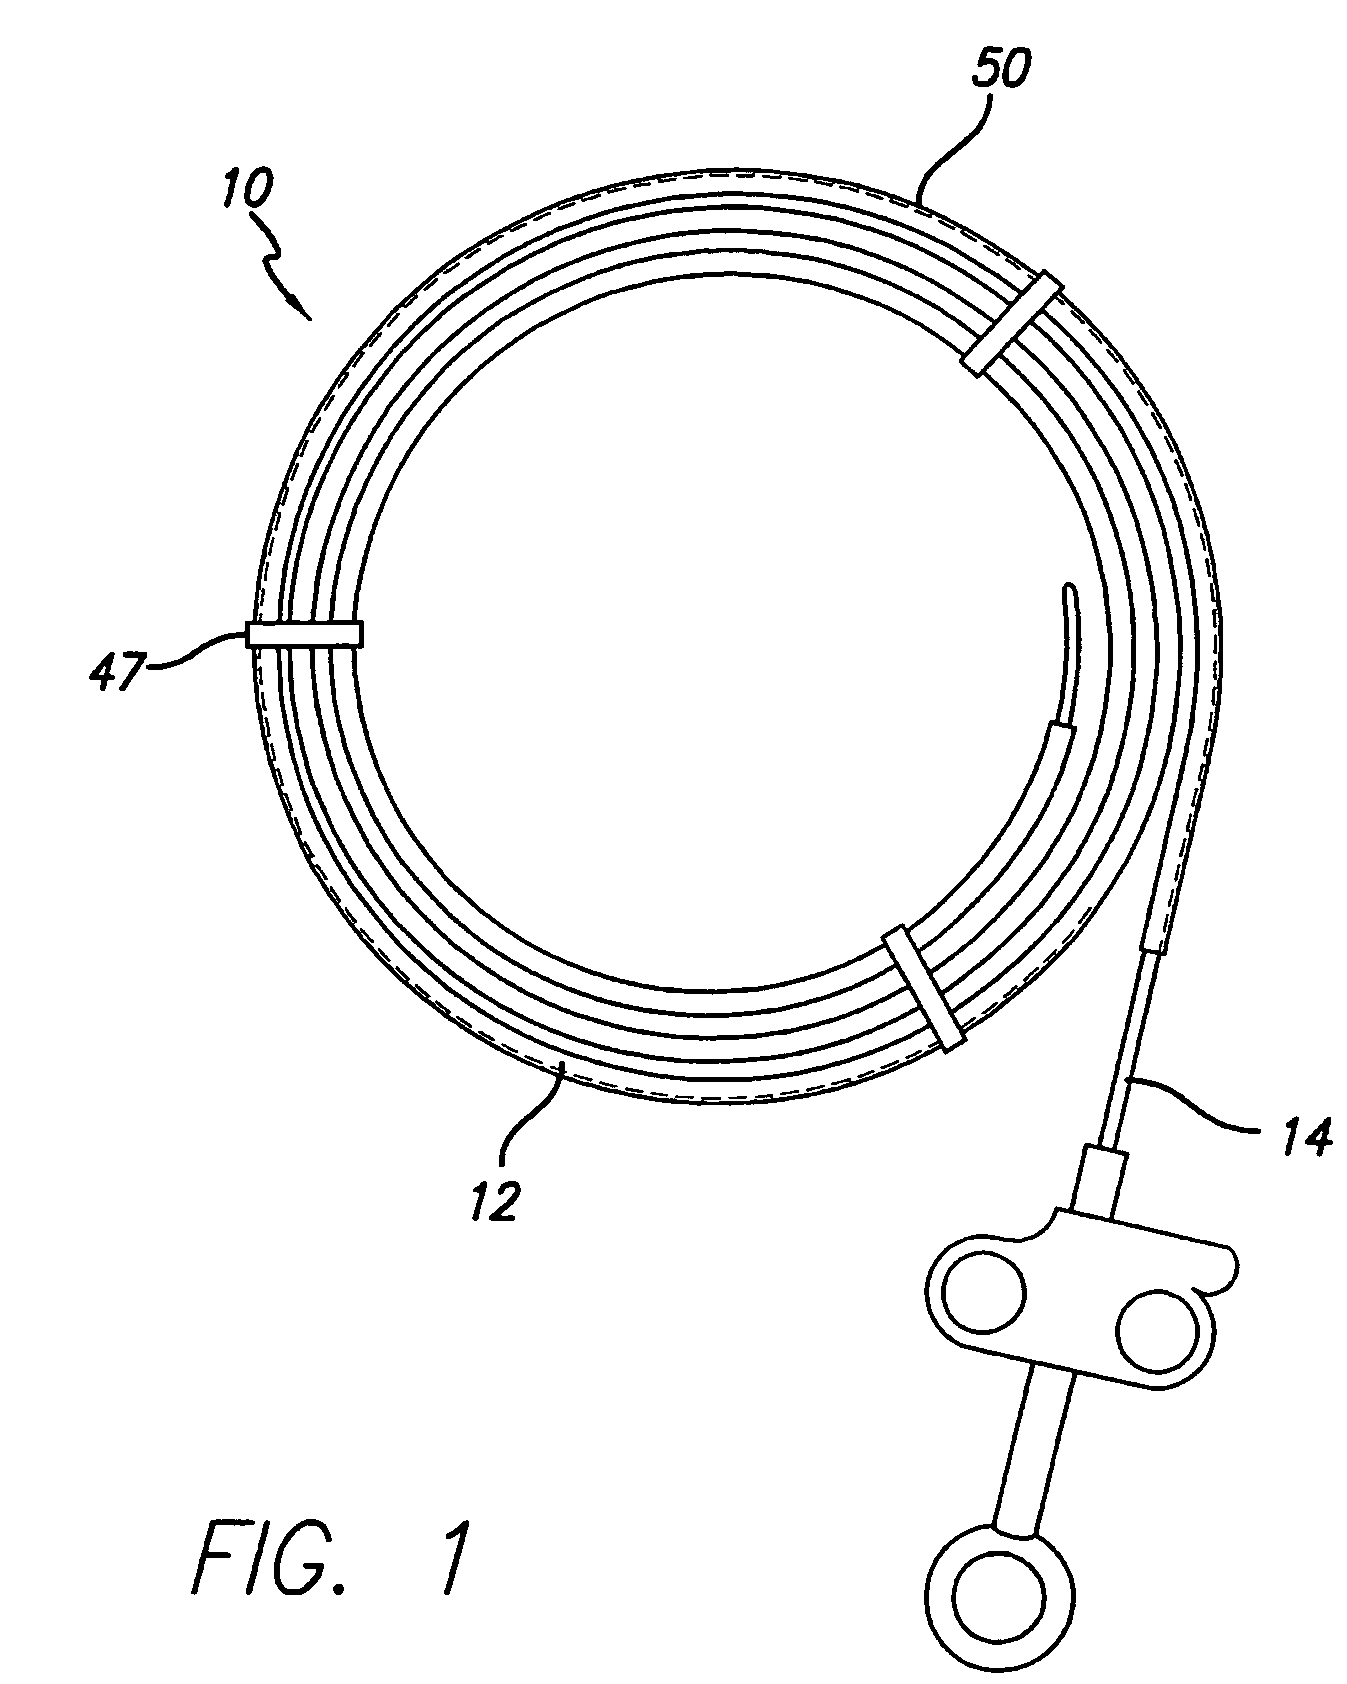 Medical device packaging assembly and method for medical device orientation